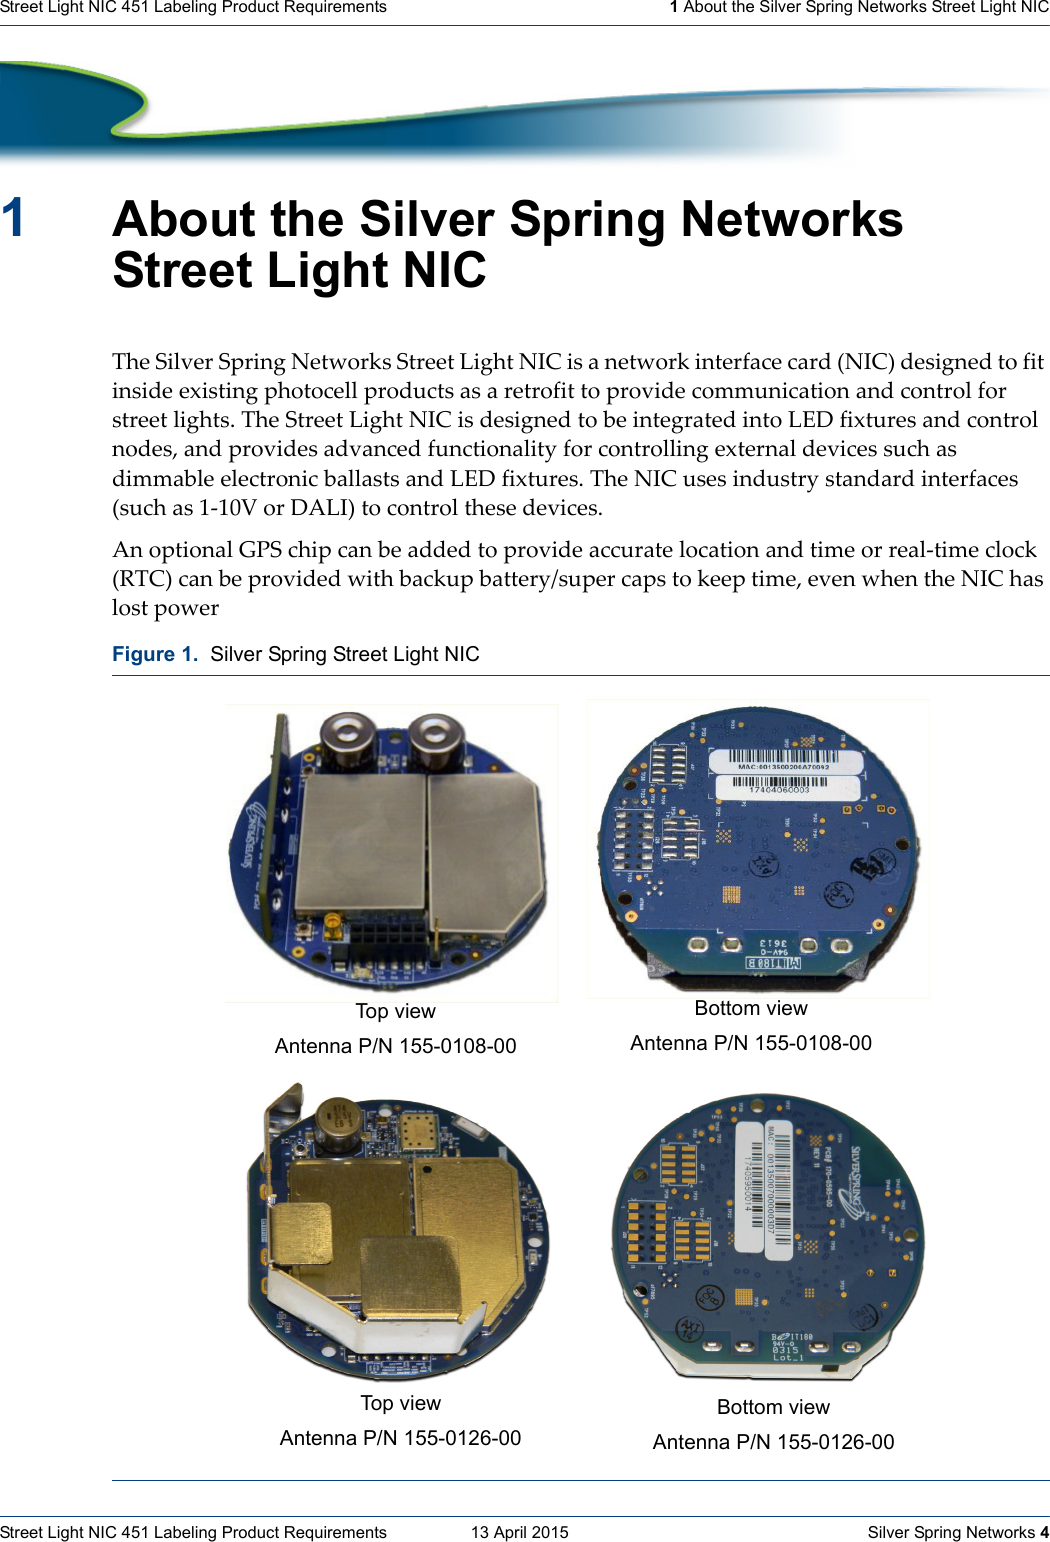 Street Light NIC 451 Labeling Product Requirements  13 April 2015    Silver Spring Networks 4Street Light NIC 451 Labeling Product Requirements 1 About the Silver Spring Networks Street Light NIC1About the Silver Spring Networks Street Light NICTheSilverSpringNetworksStreetLightNICisanetworkinterfacecard(NIC)designedtofitinsideexistingphotocellproductsasaretrofittoprovidecommunicationandcontrolforstreetlights.TheStreetLightNICisdesignedtobeintegratedintoLEDfixturesandcontrolnodes,andprovidesadvancedfunctionalityforcontrollingexternaldevicessuchasdimmableelectronicballastsandLEDfixtures.TheNICusesindustrystandardinterfaces(suchas1‐10VorDALI)tocontrolthesedevices.AnoptionalGPSchipcanbeaddedtoprovideaccuratelocationandtimeorreal‐timeclock(RTC)canbeprovidedwithbackupbattery/supercapstokeeptime,evenwhentheNIChaslostpowerFigure 1.  Silver Spring Street Light NICTop  v ie wAntenna P/N 155-0108-00Bottom viewAntenna P/N 155-0108-00Top viewAntenna P/N 155-0126-00Bottom viewAntenna P/N 155-0126-00